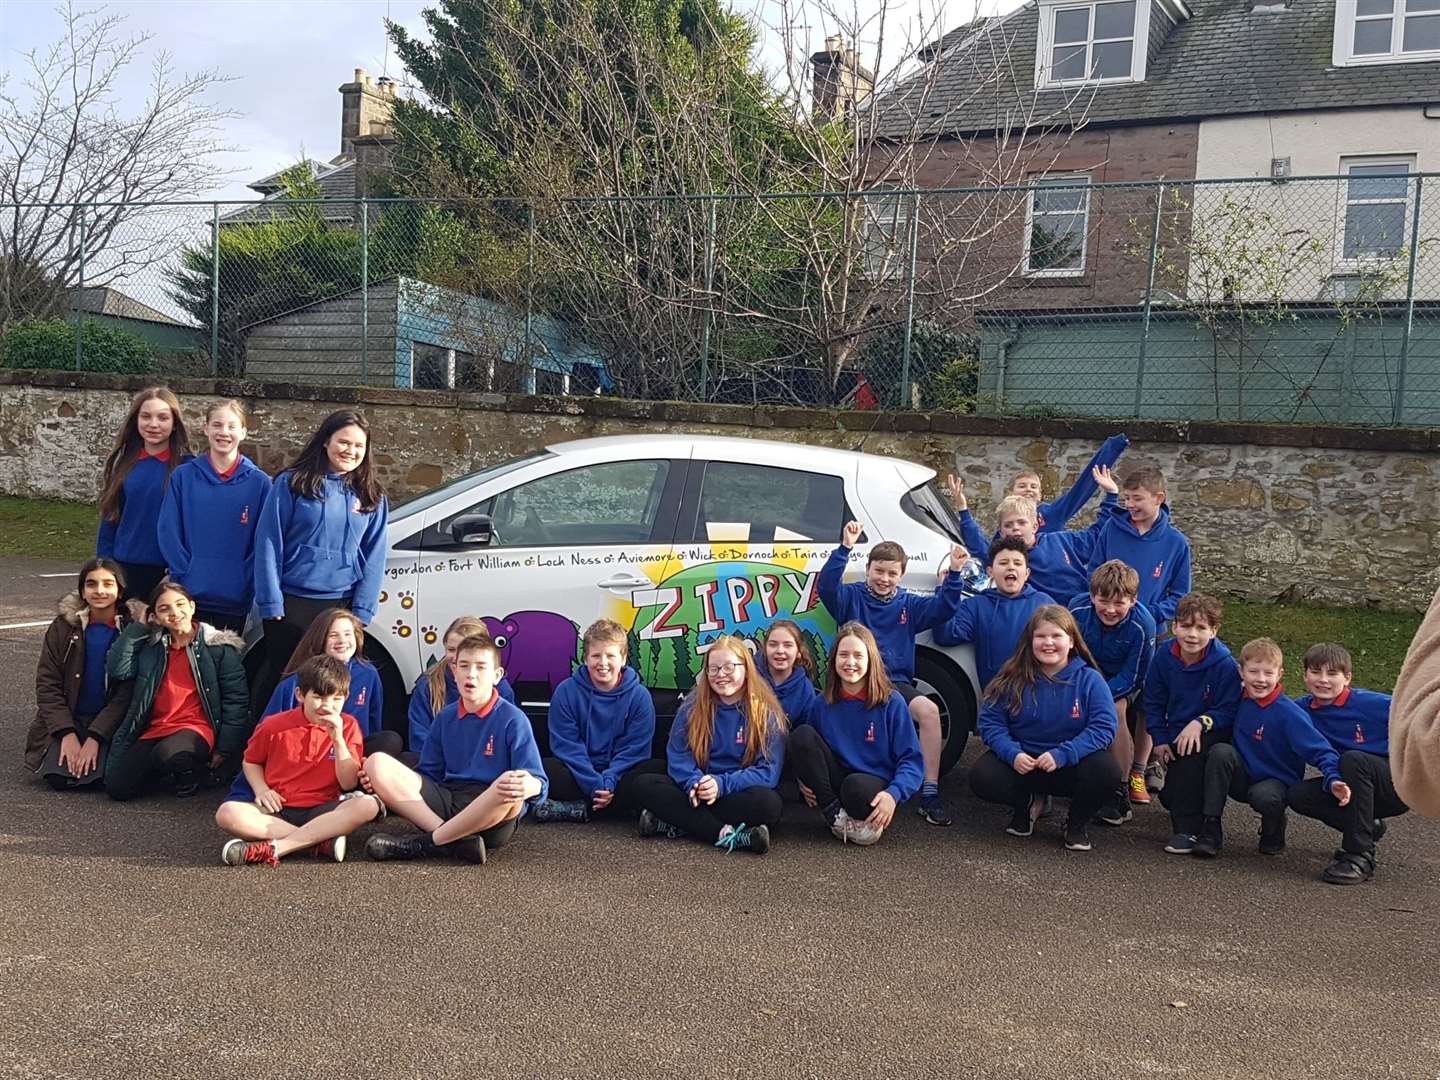 Crown Primary pupils with winner Aysha Reid (standing near the wing mirror) and Highland Council's electric vehicle (EV) Zippy Zoe.